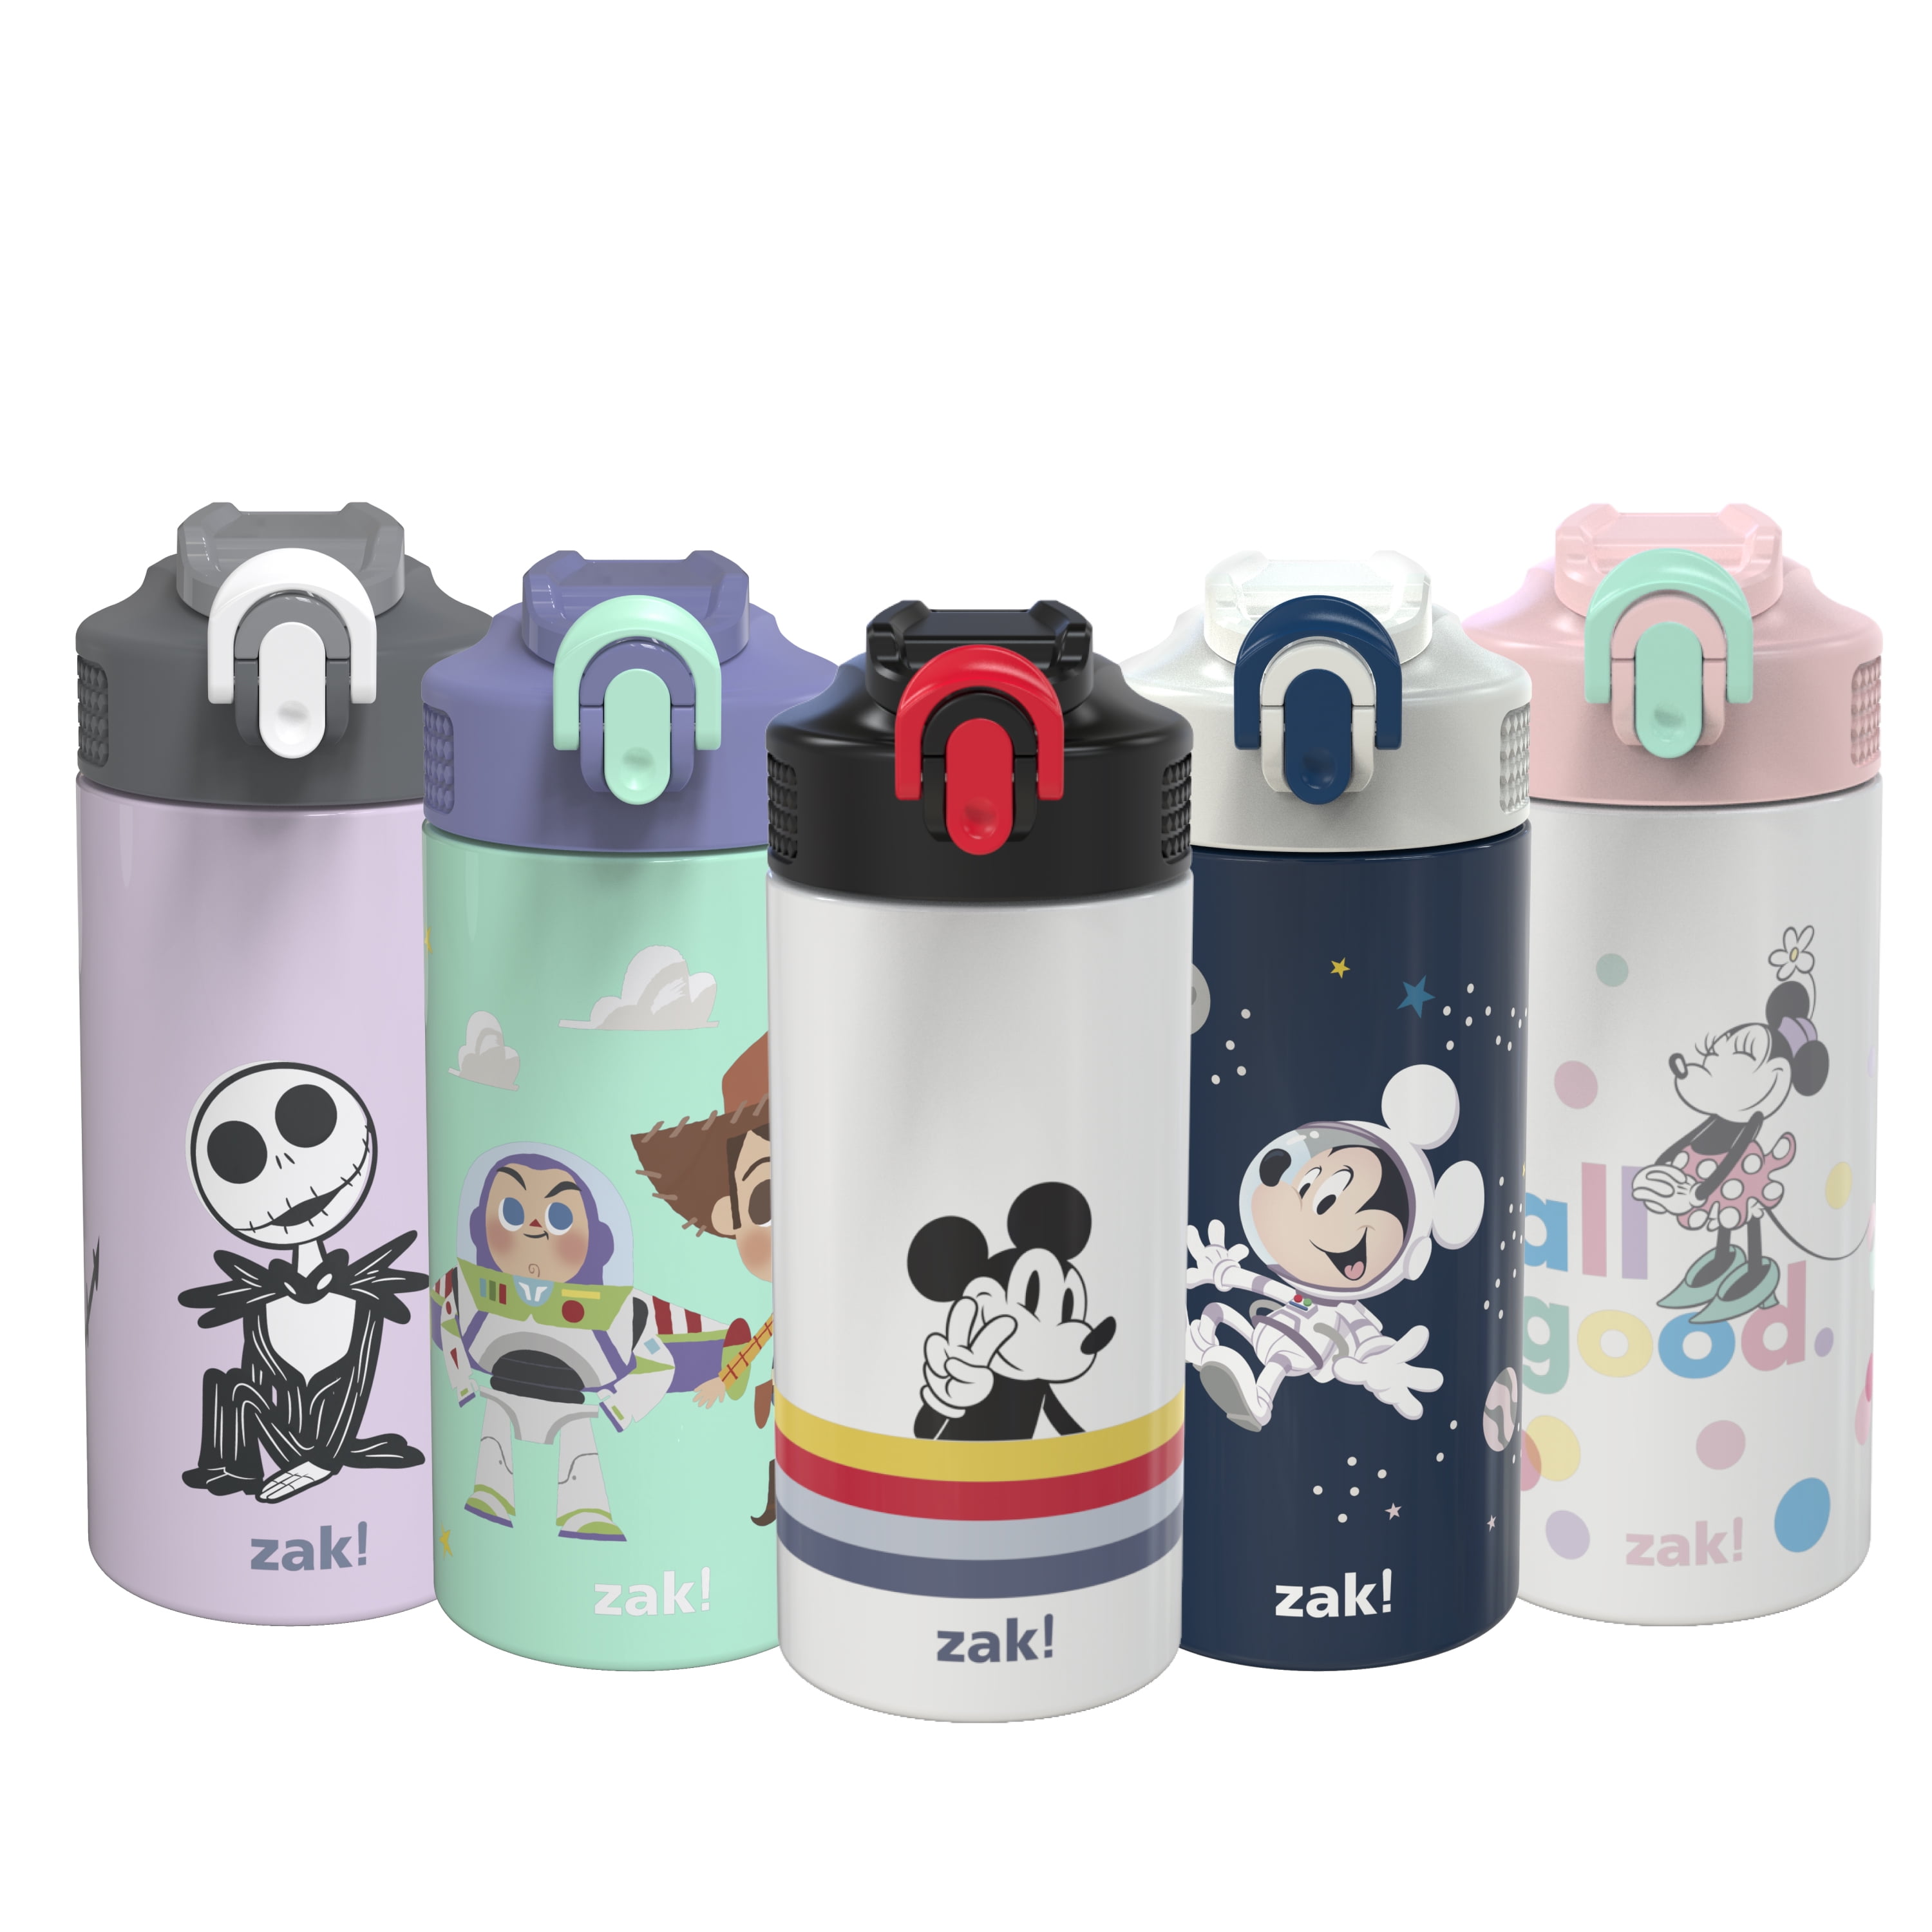 DISNEY STORE Minnie Mouse Stainless Steel Water Bottle with Built-In Straw NEW 